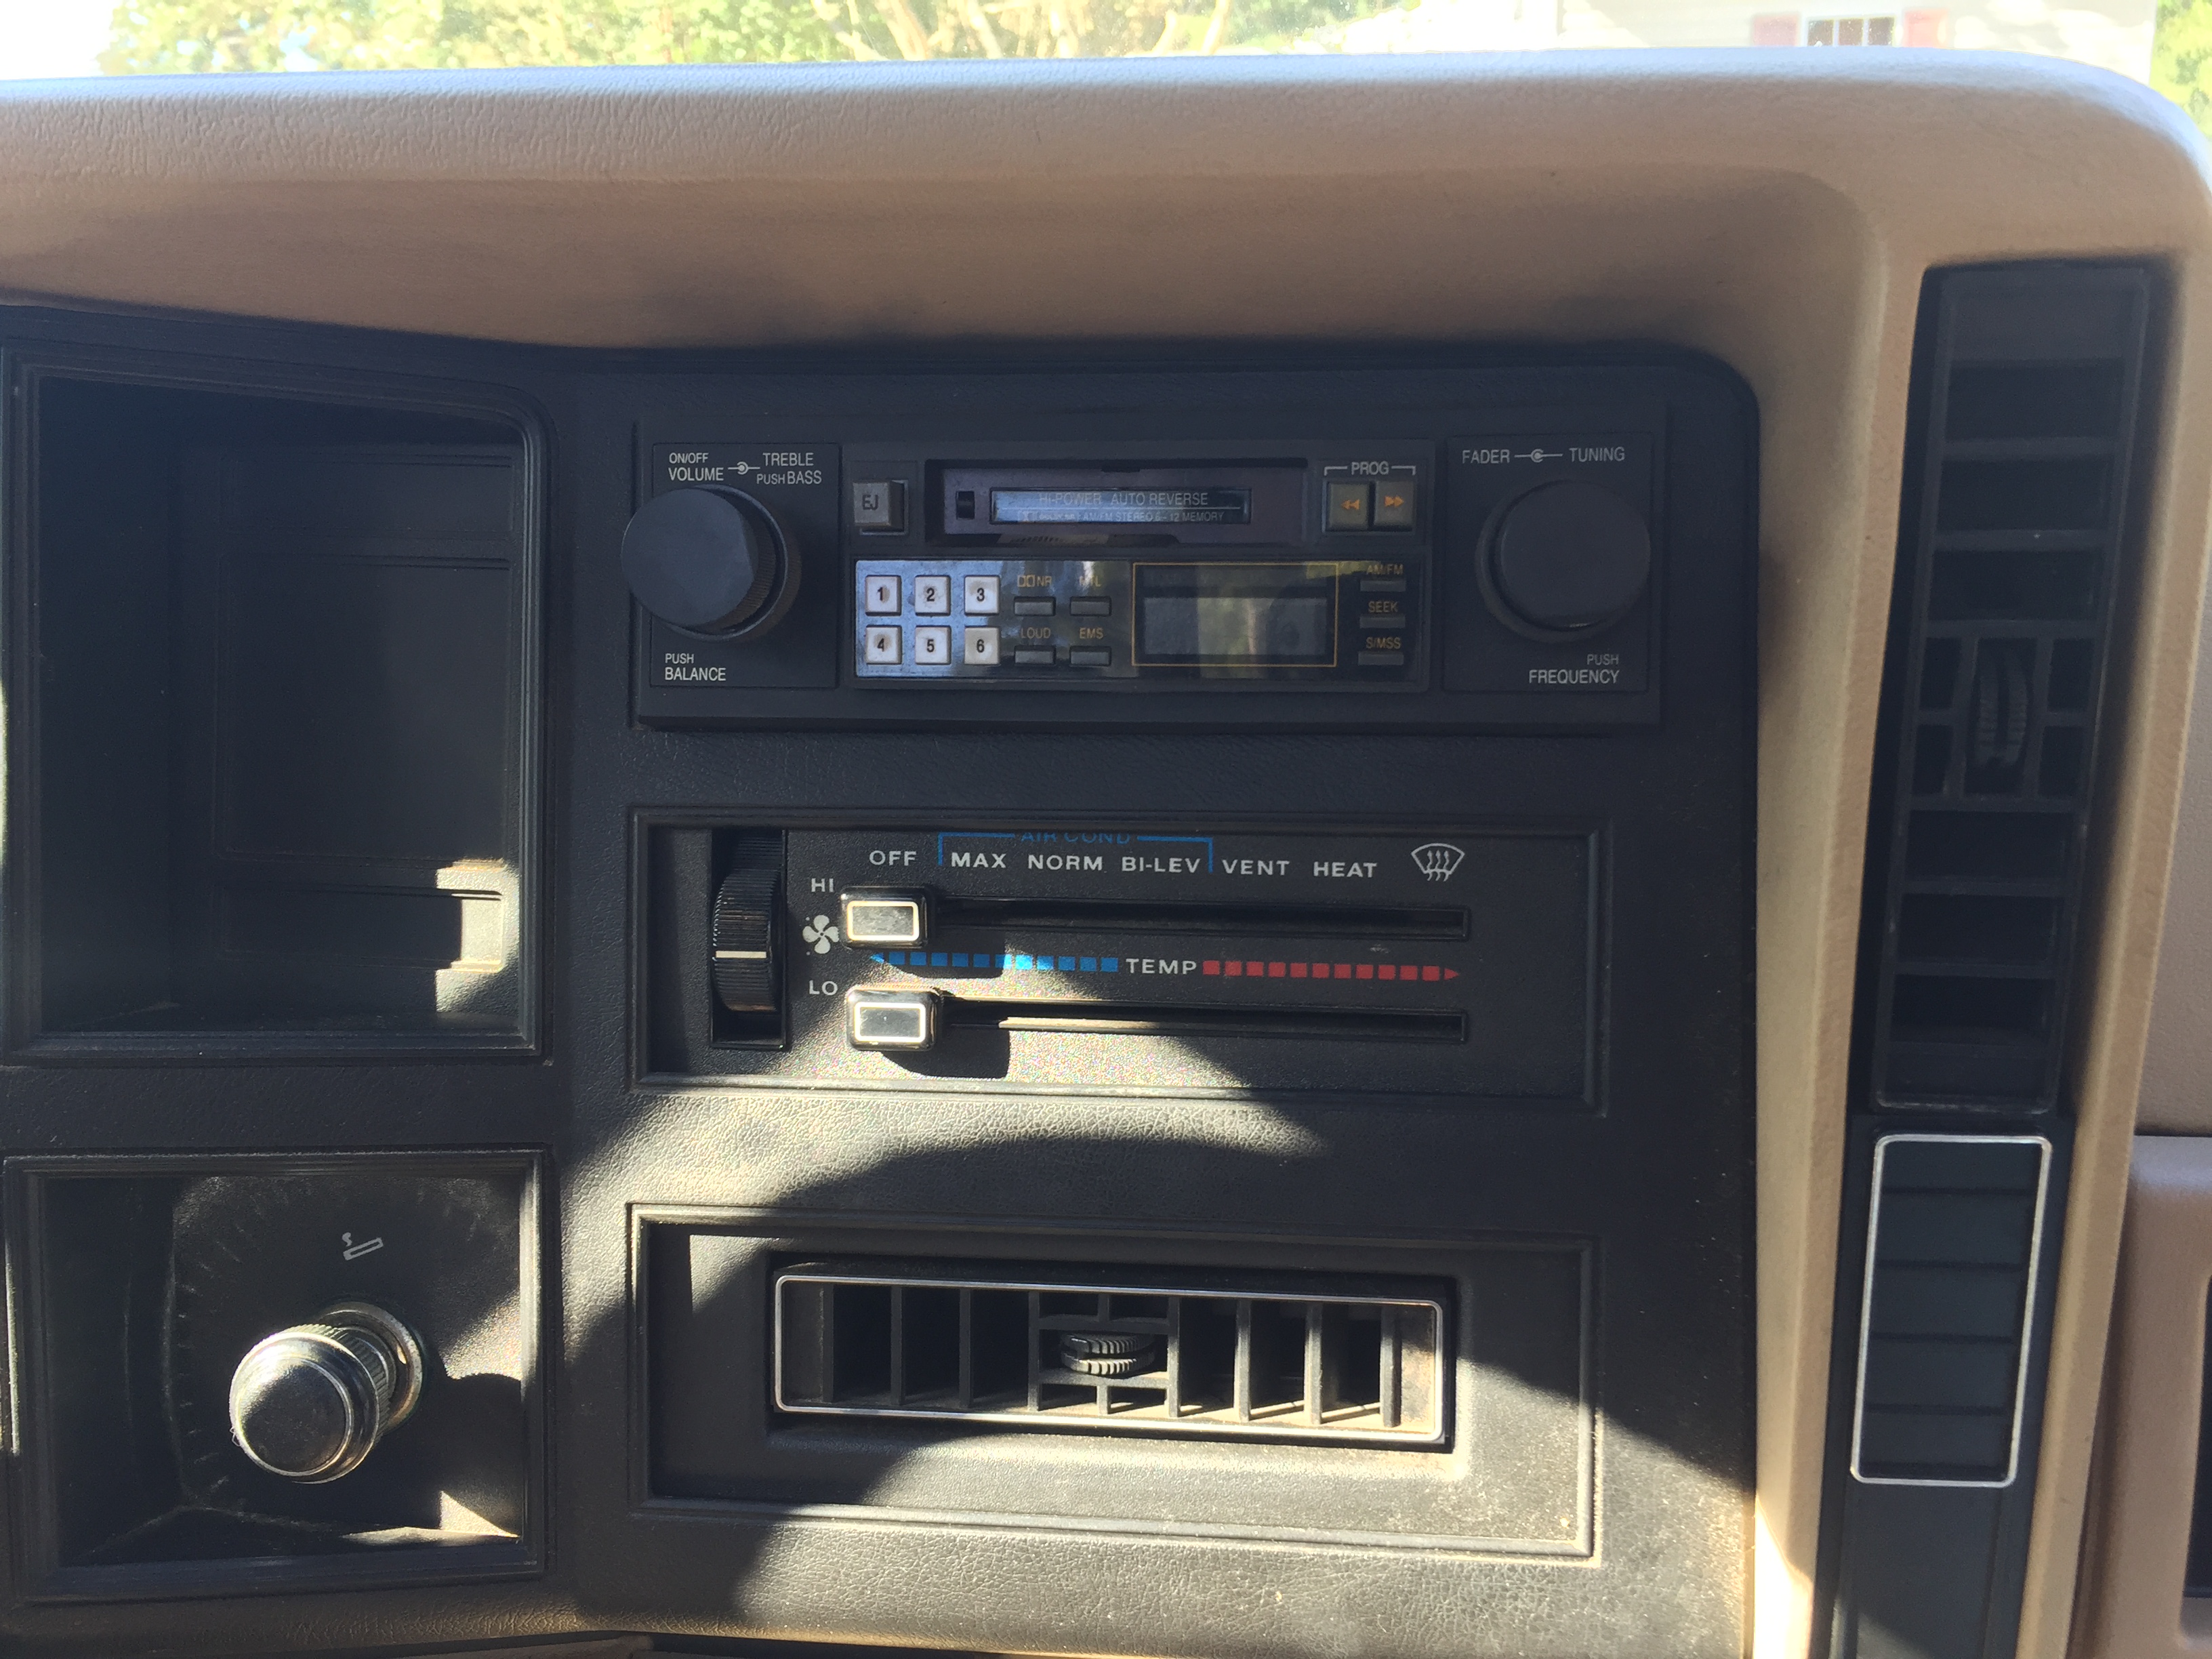 Radio And Interior Lights Not Working Properly In 91